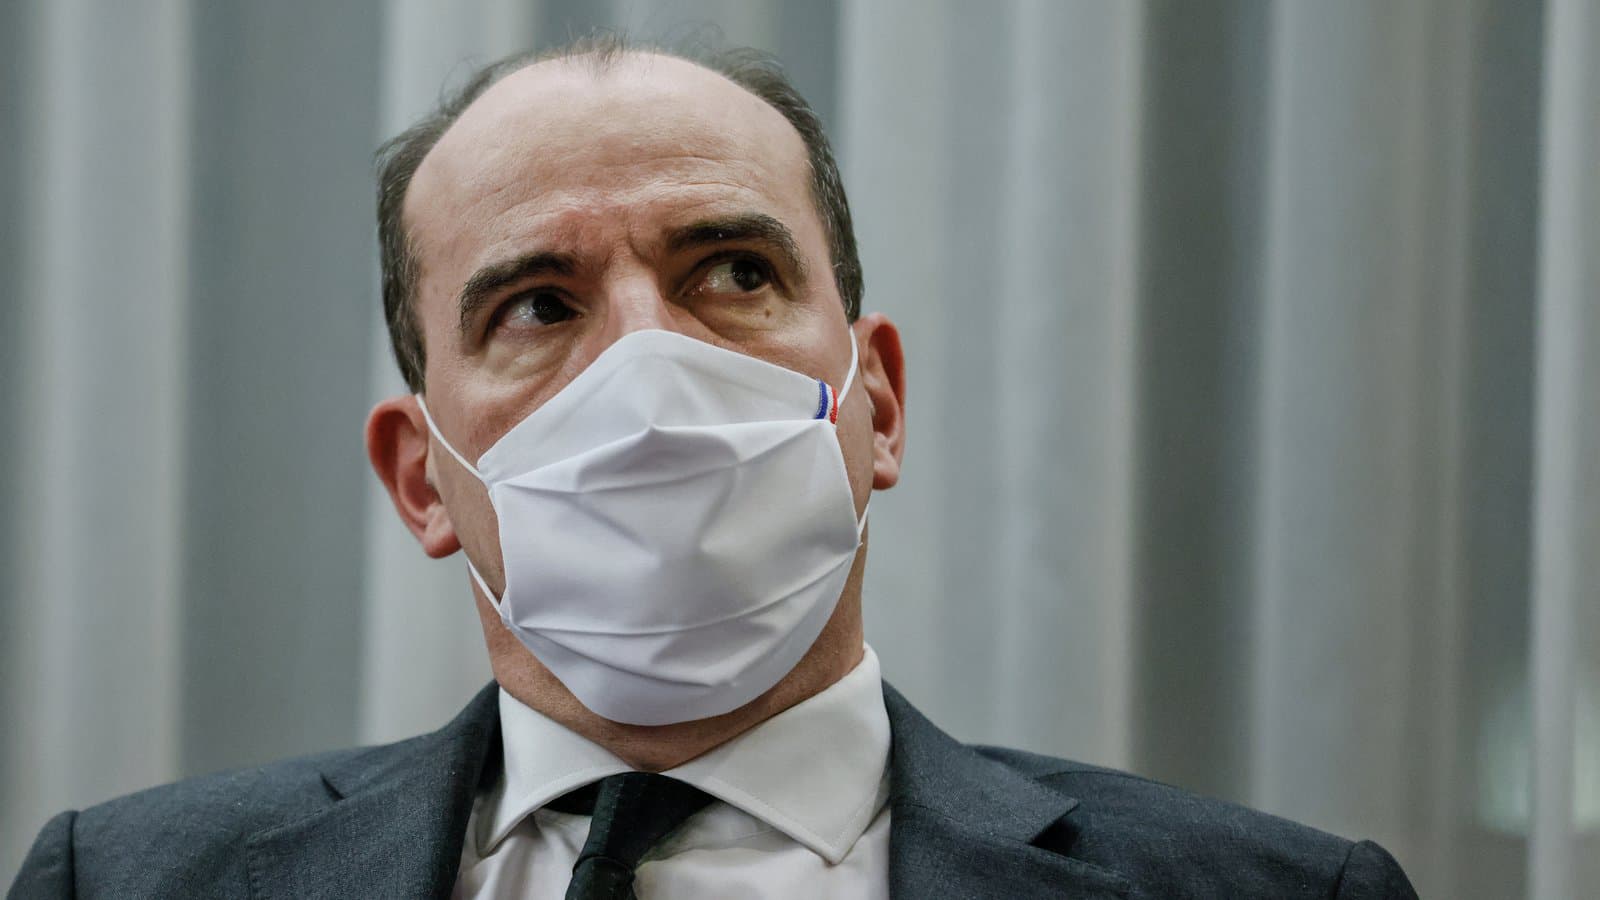 French Prime Minister Castel ends his 7-day quarantine after being identified as a close contact with Macron